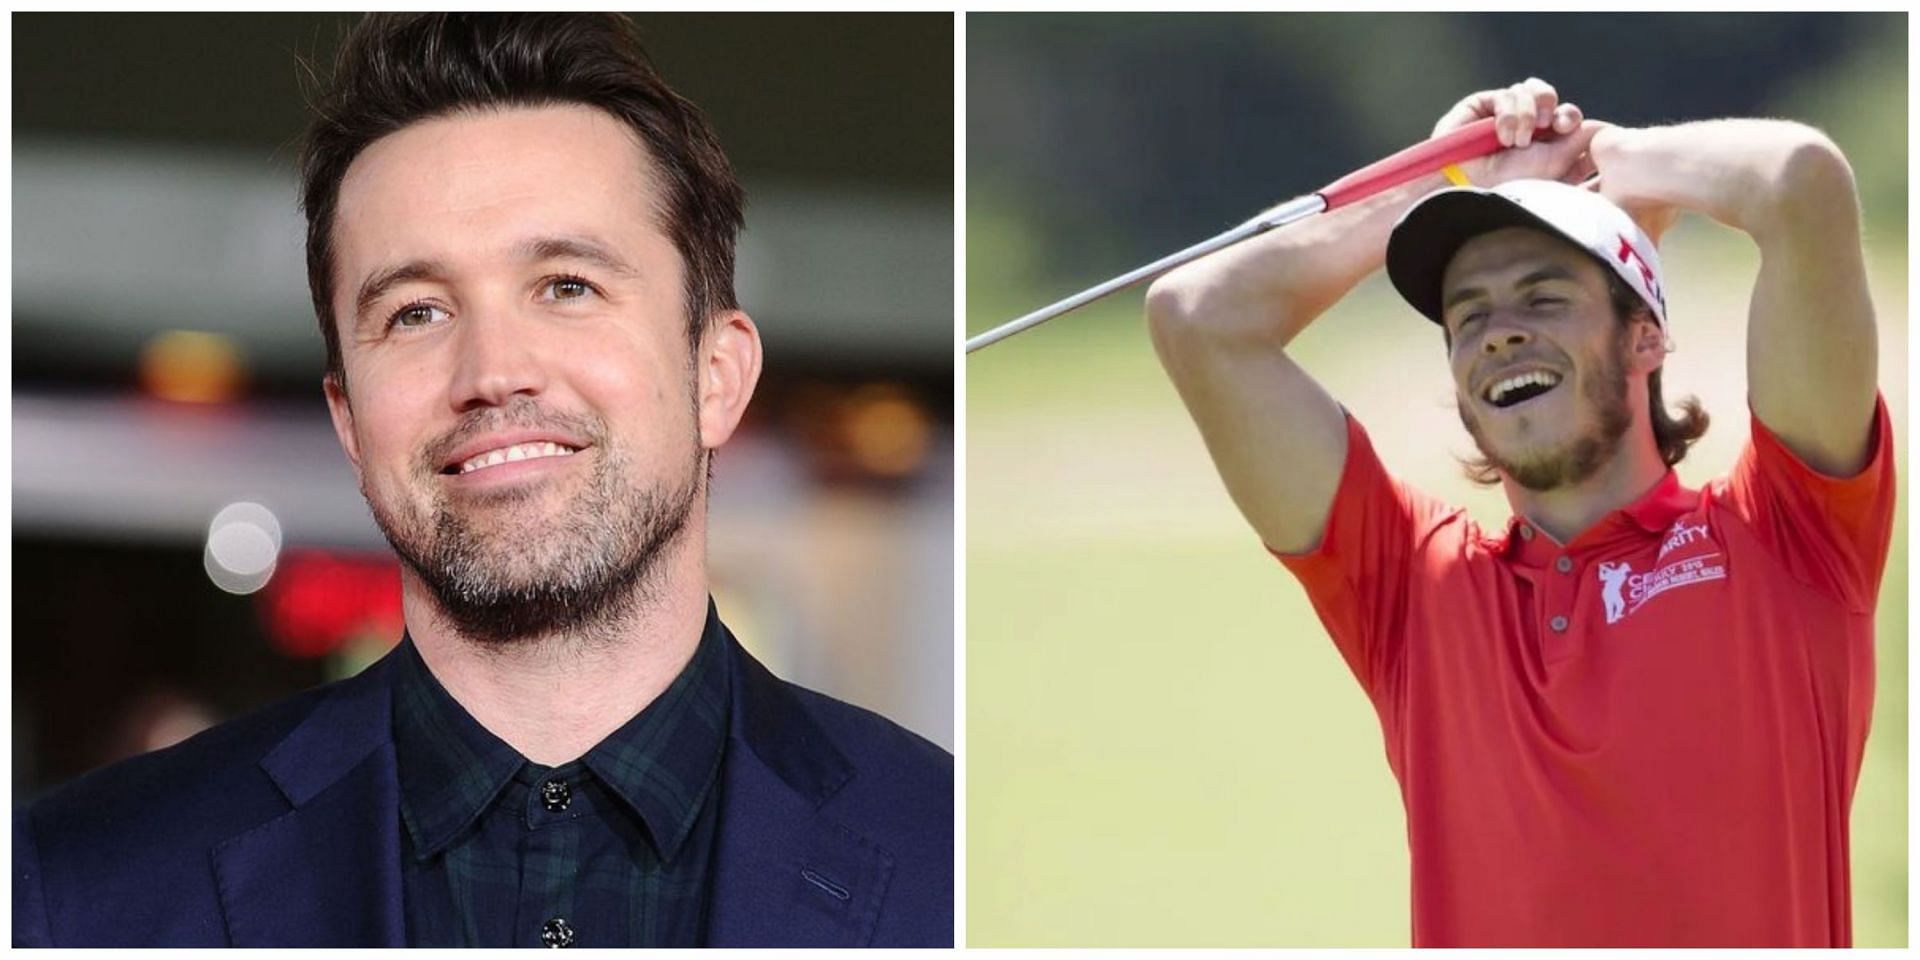 Wrexham owner Rob McElhenney offered Bale for a special golf game